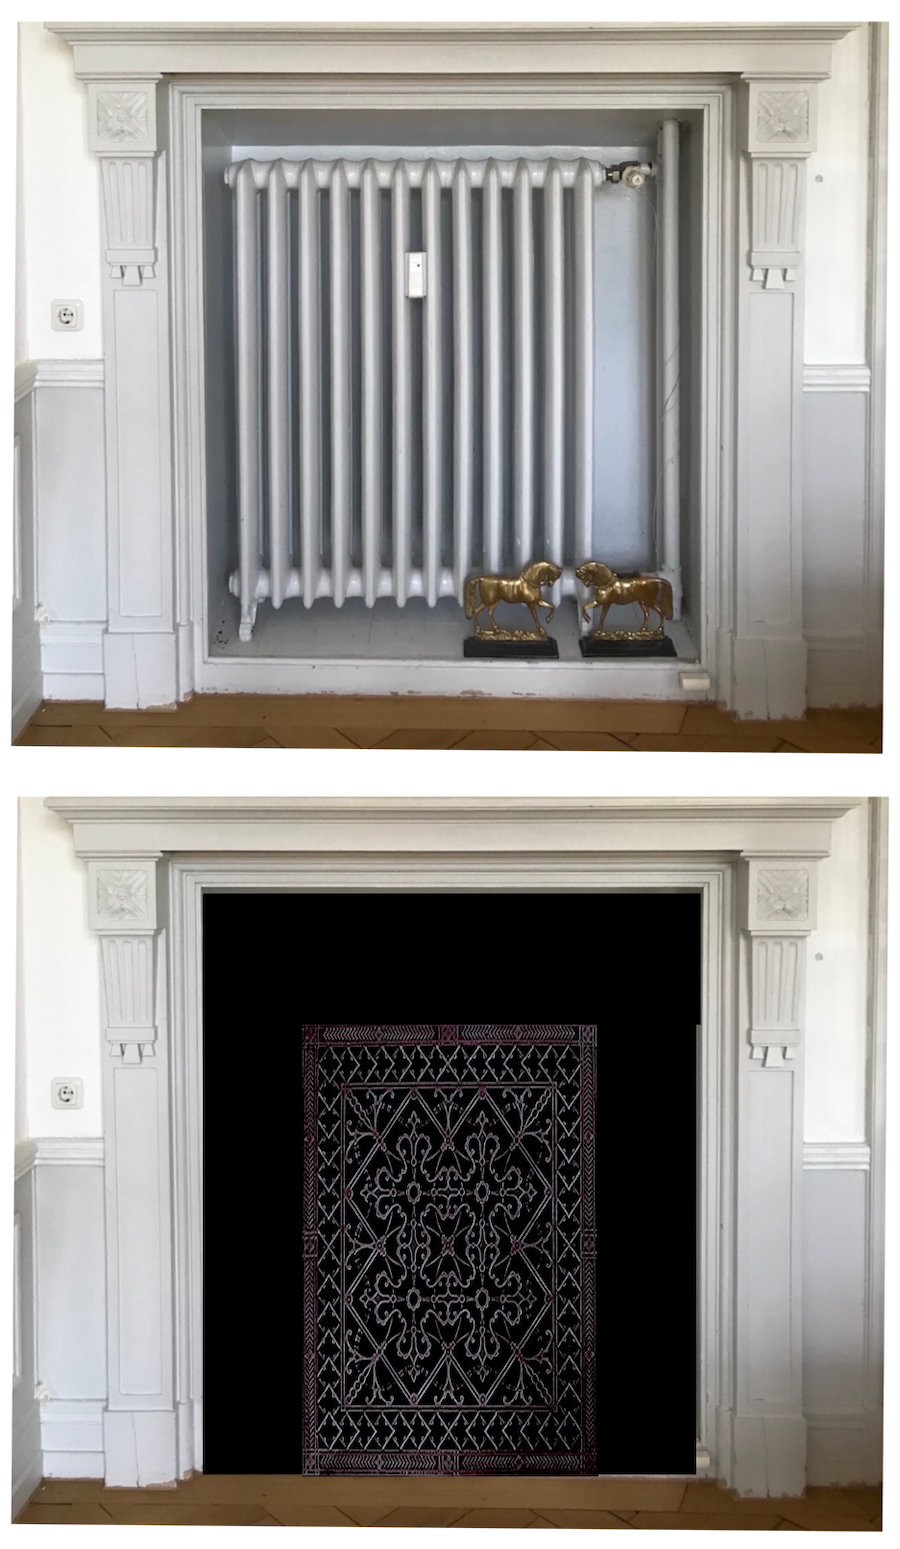 hiding the radiator fireplace mantel with iron grill